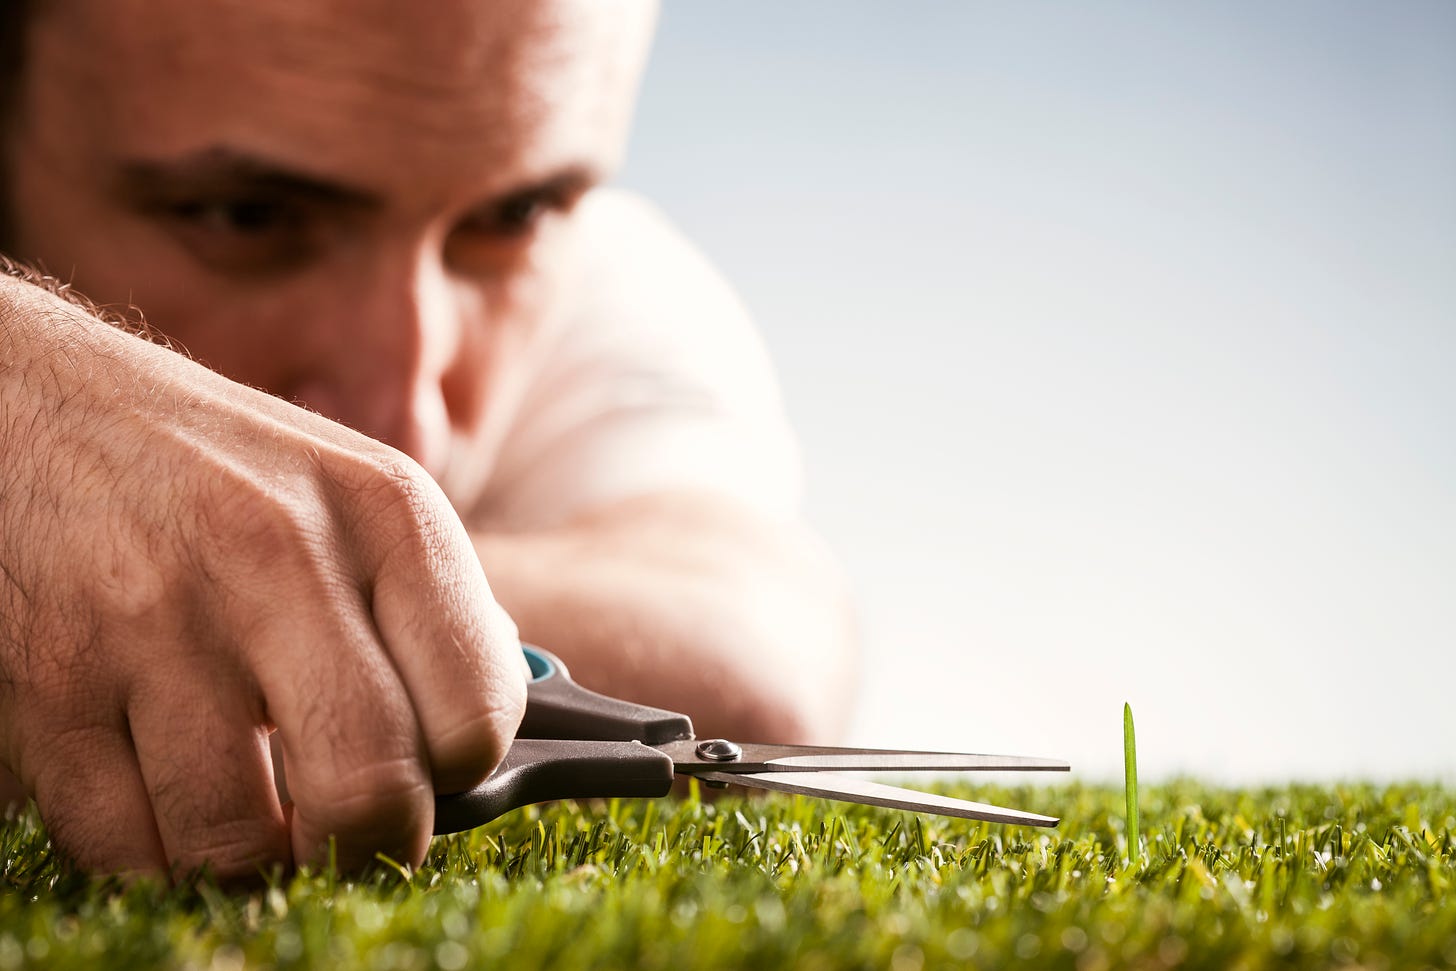 A man with hairy knuckles cutting a single blade of grass with scissors